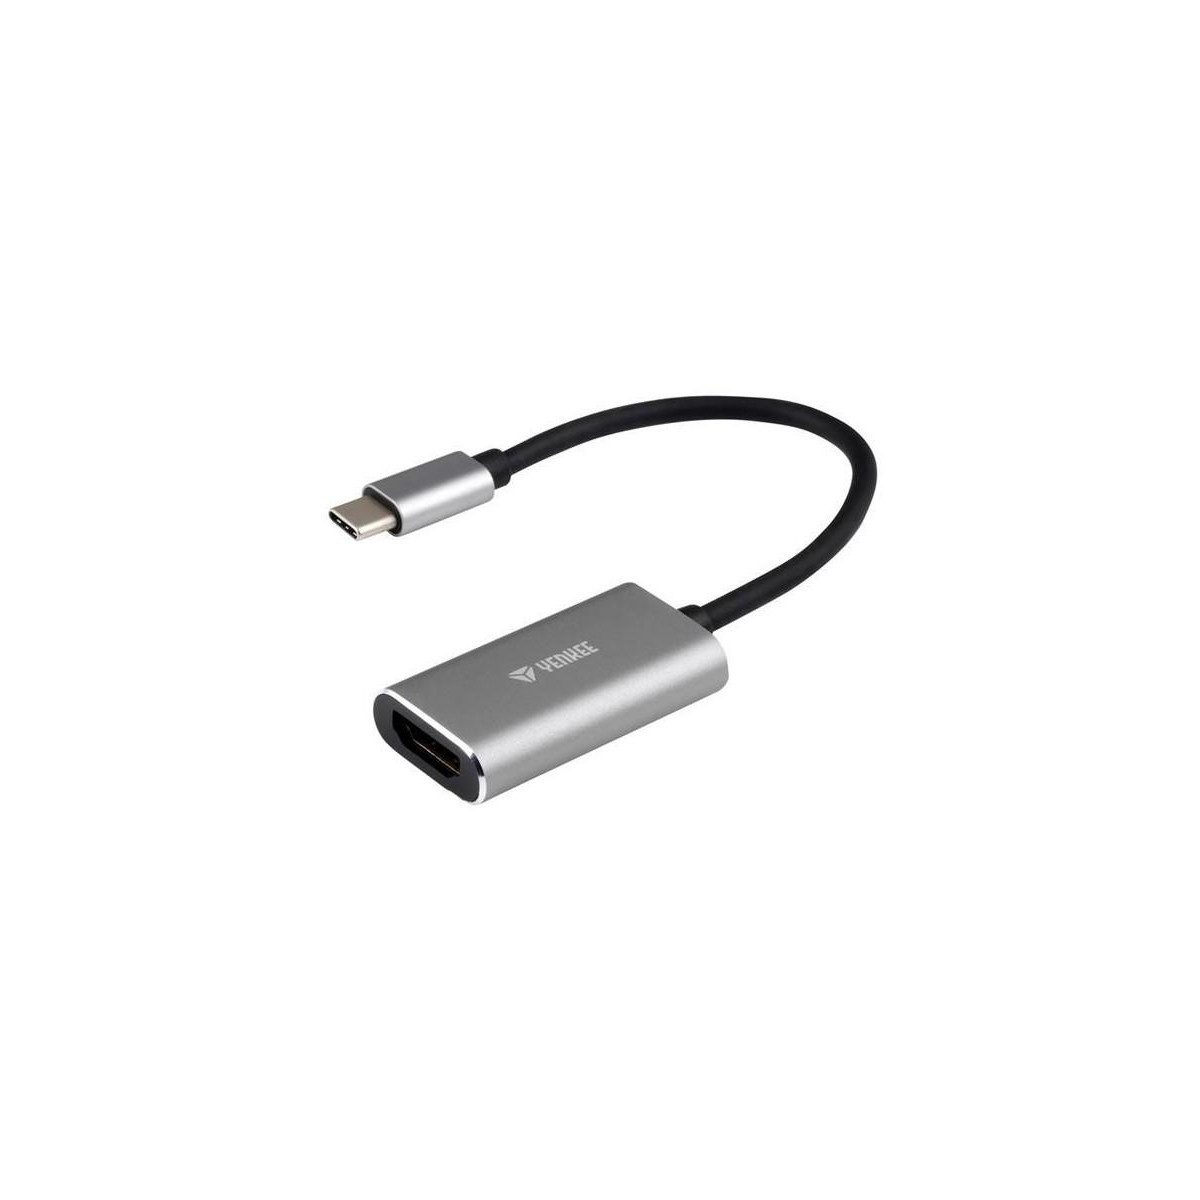 More about Adaptér YENKEE USB C Na HDMI YTC 012